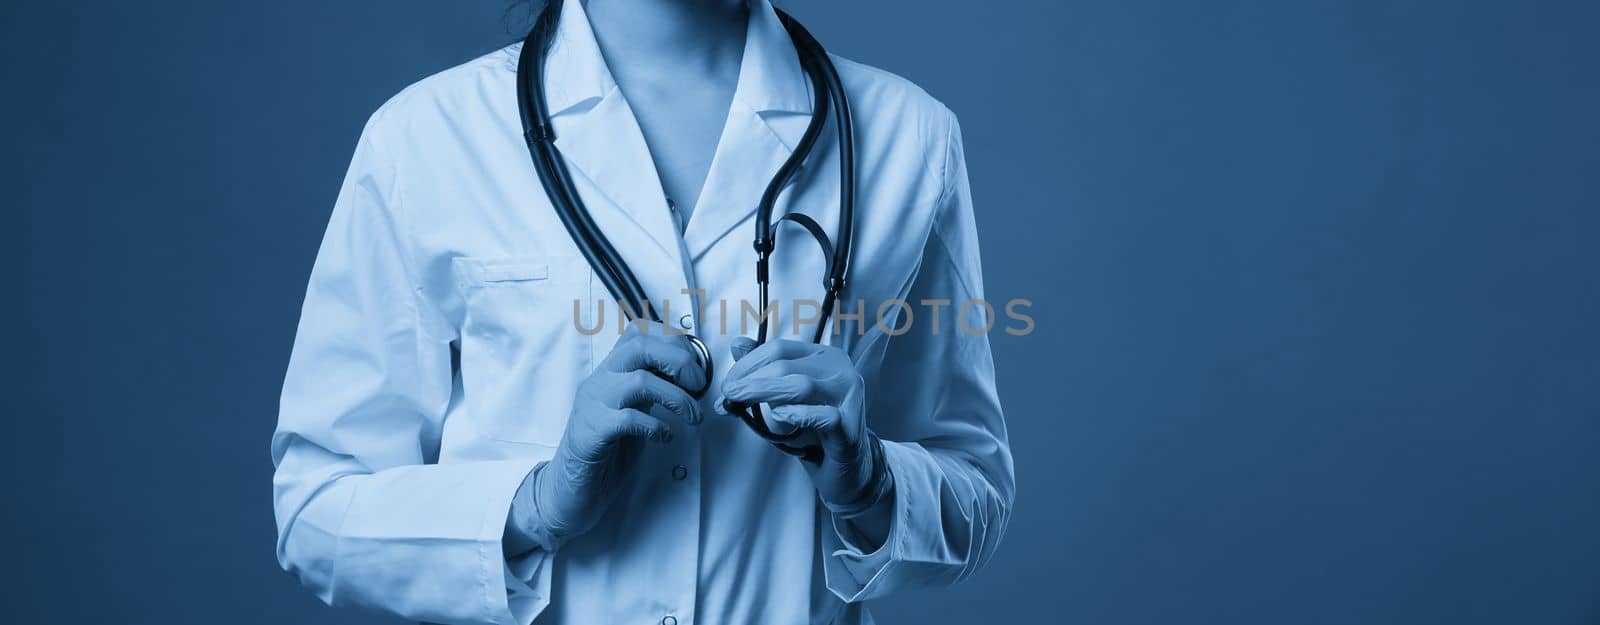 Young doctor with stethoscope against dark blue background, studio shot with copy space by Mariakray